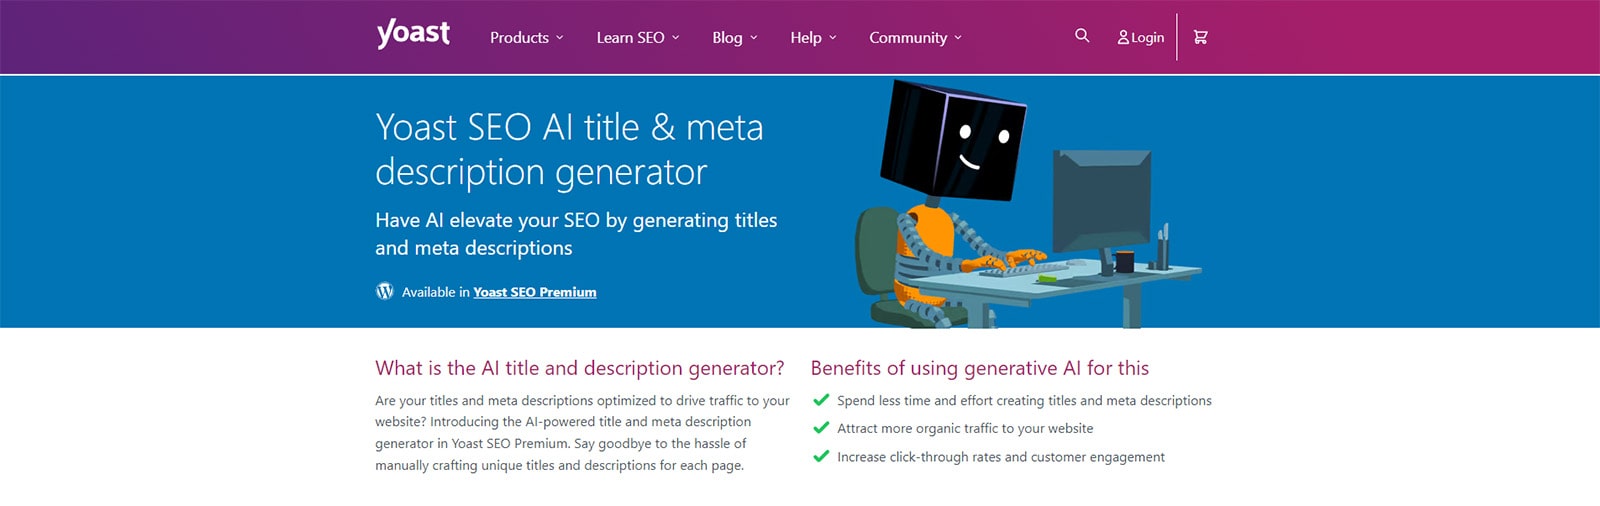 Visual of Yoast SEO, a top-rated WordPress solution for SEO with meta title & description generation.